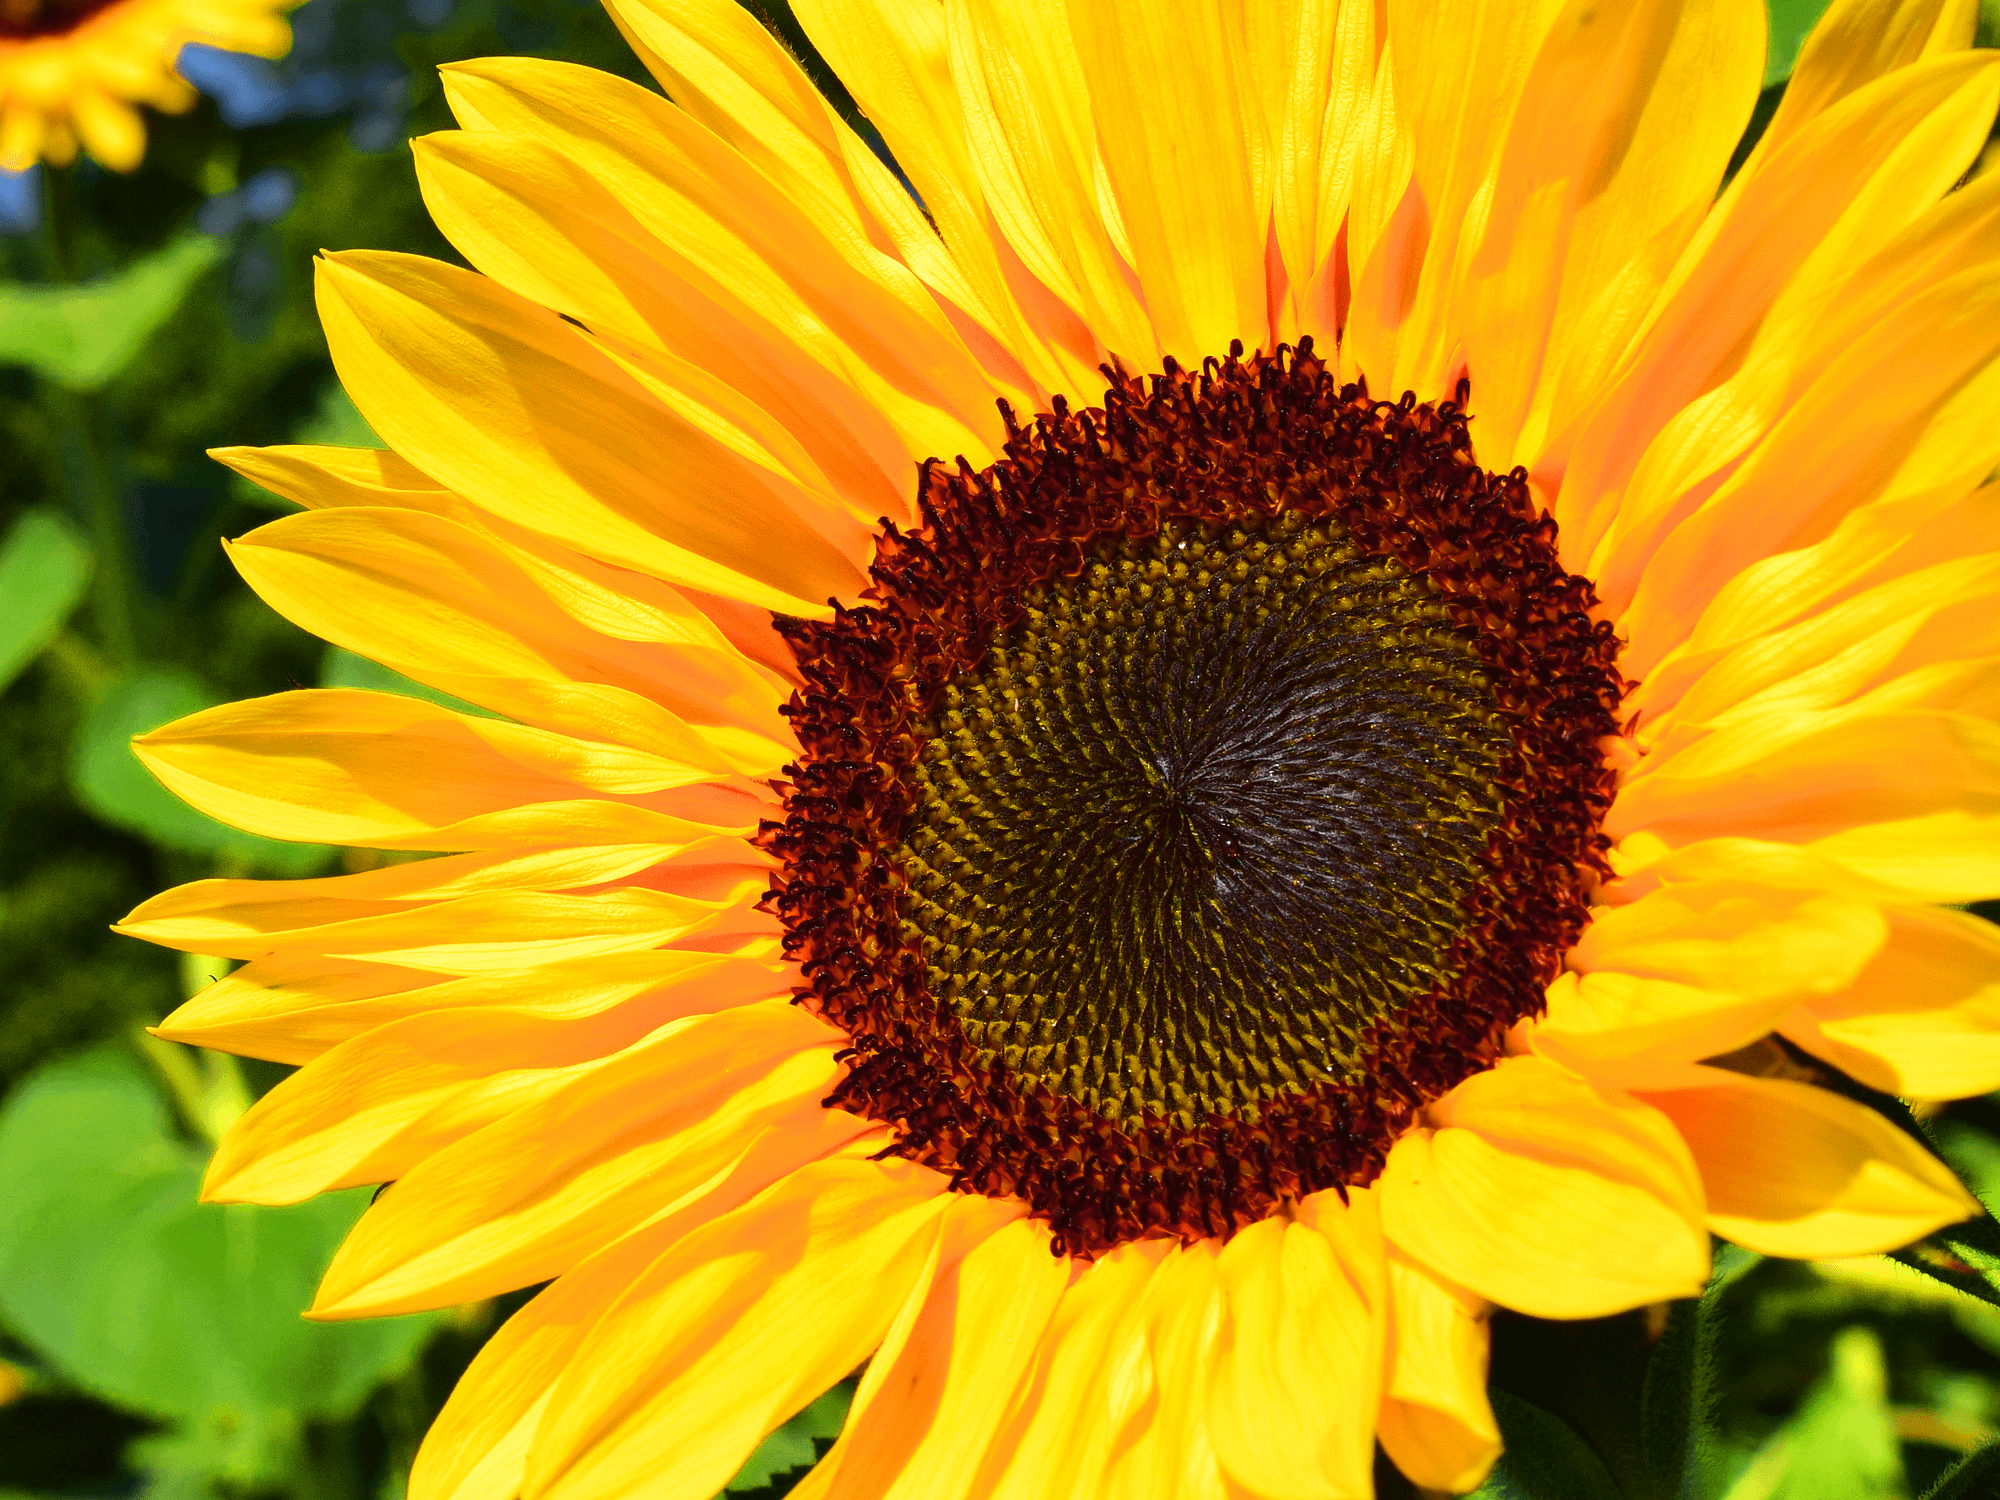 The Sunflower has the golden ratio for every pedal as it relates to the successive pedal.